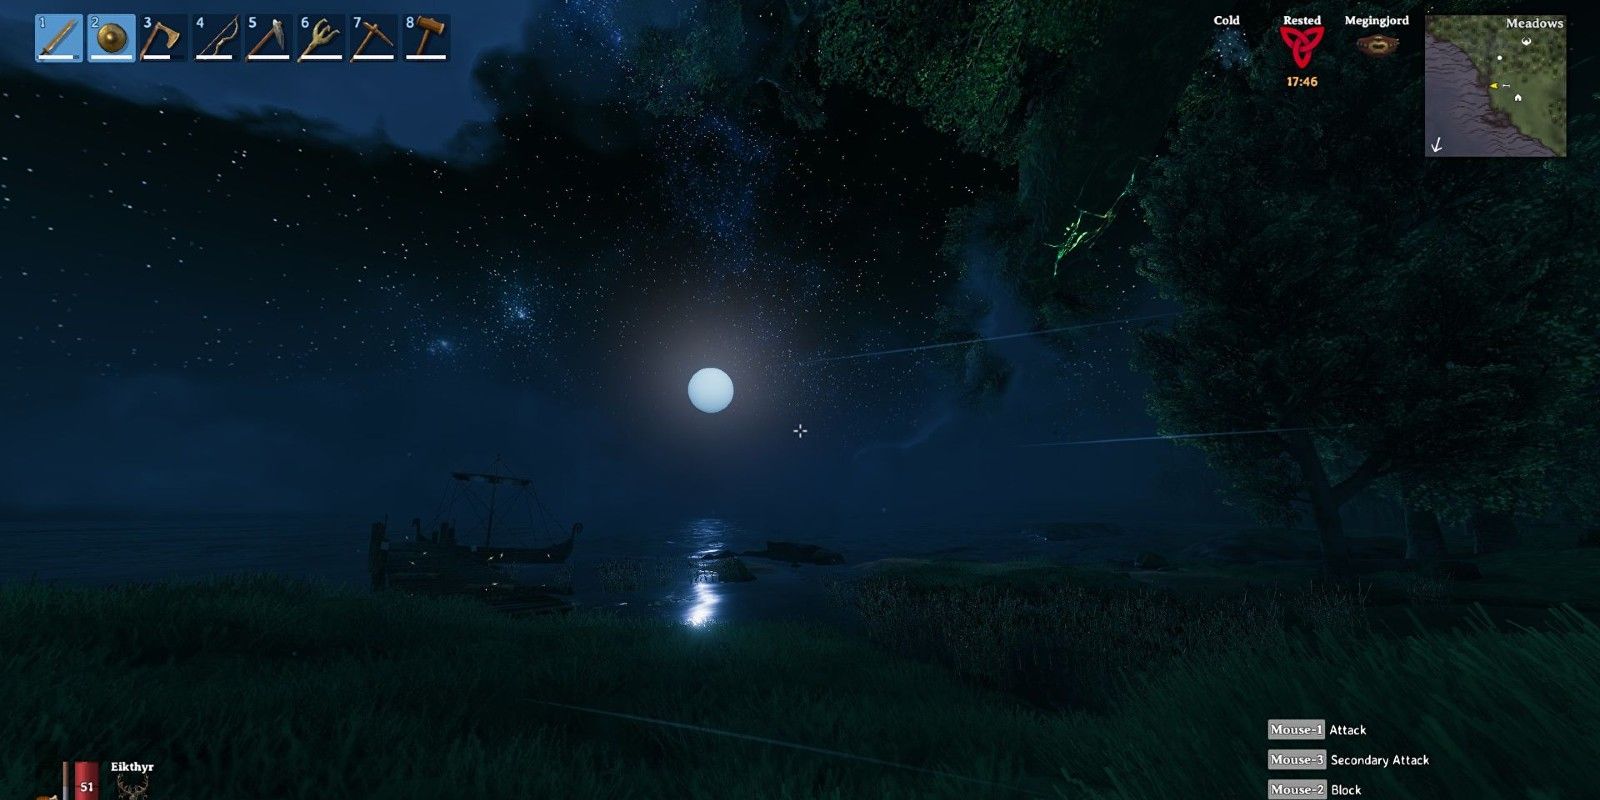 A player looks at the moon over water using First Person View Mod in Valheim